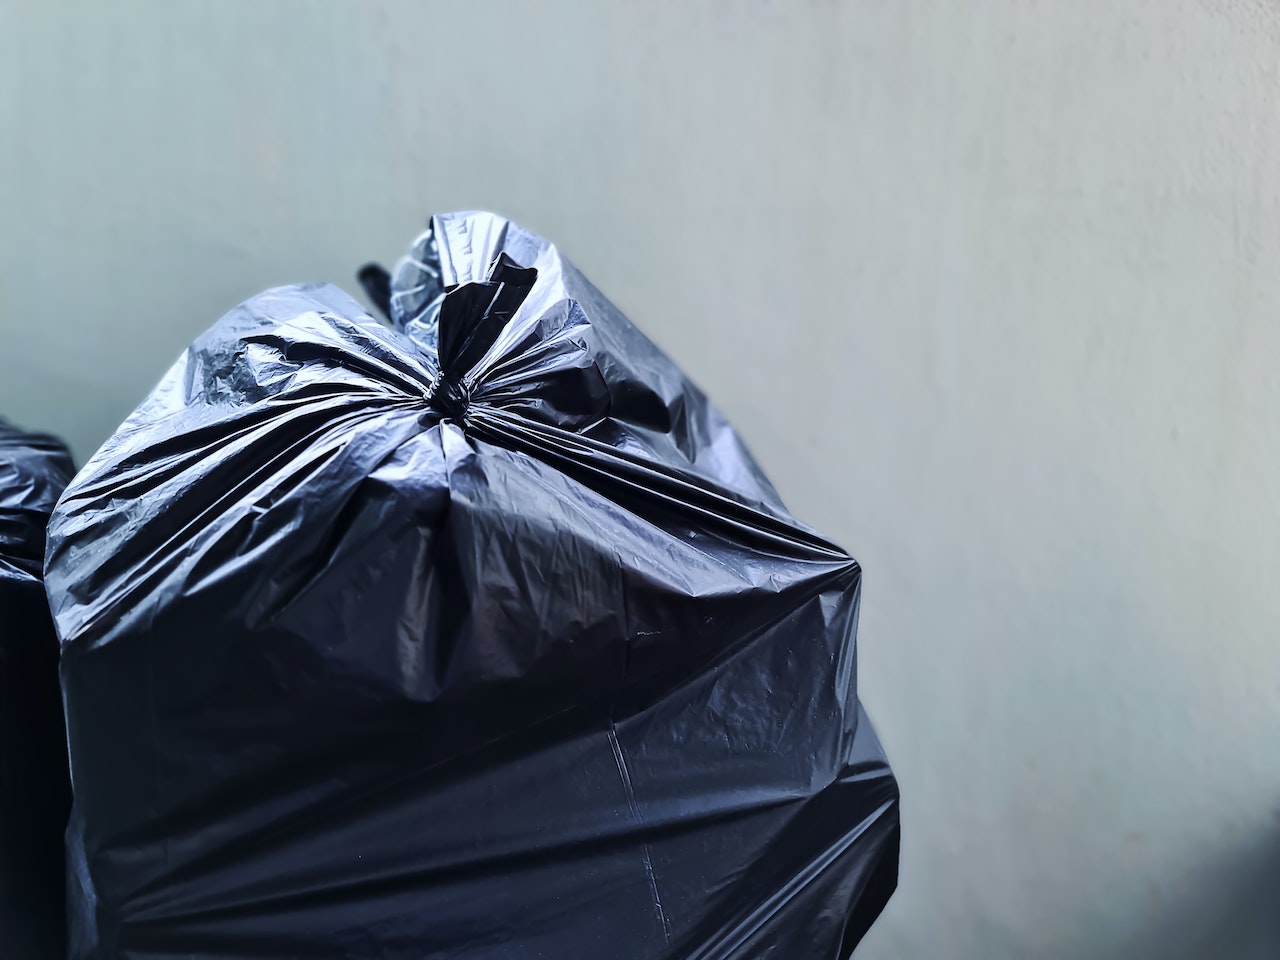 Clear garbage bags: invasion of privacy or smart diversion policy?